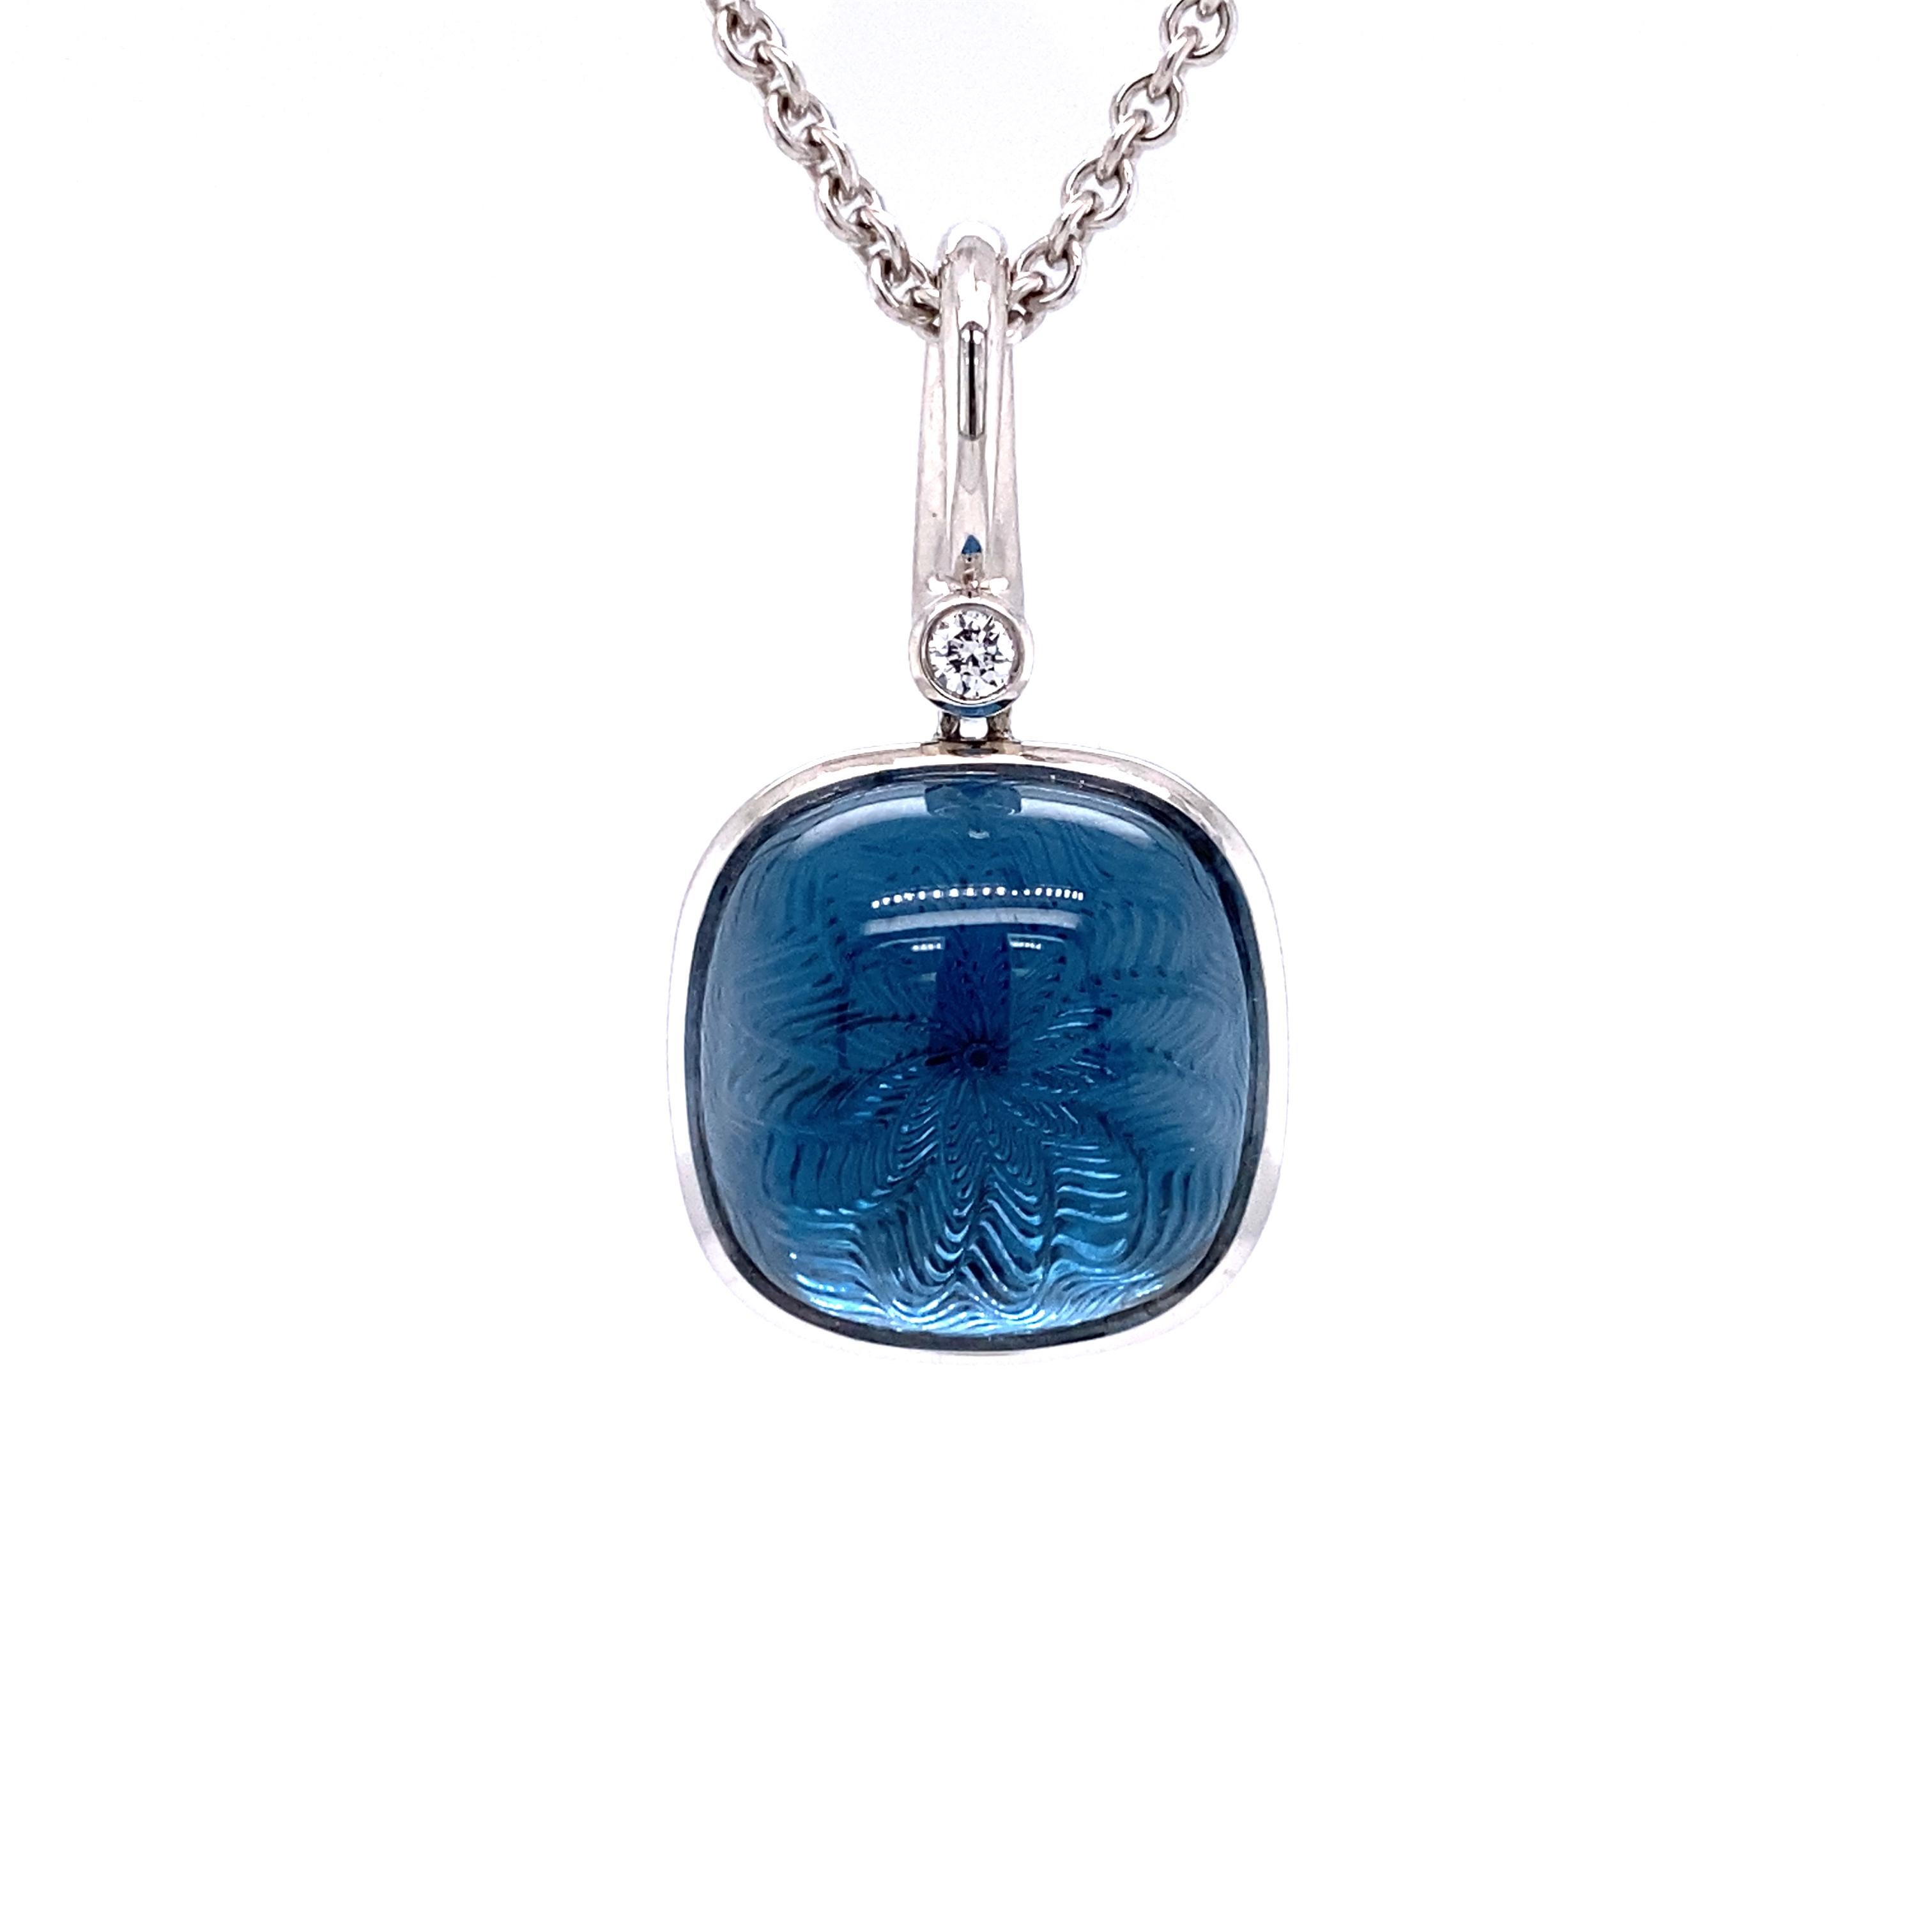 Victor Mayer square shaped pendant necklace 18k white gold, Era collection, 1 diamond, total 0.04 ct, G VS, brilliant cut, 1 blue topaz cabochon, guilloche wave pattern, diameter app. 16.0 mm

About the creator Victor Mayer
Victor Mayer is